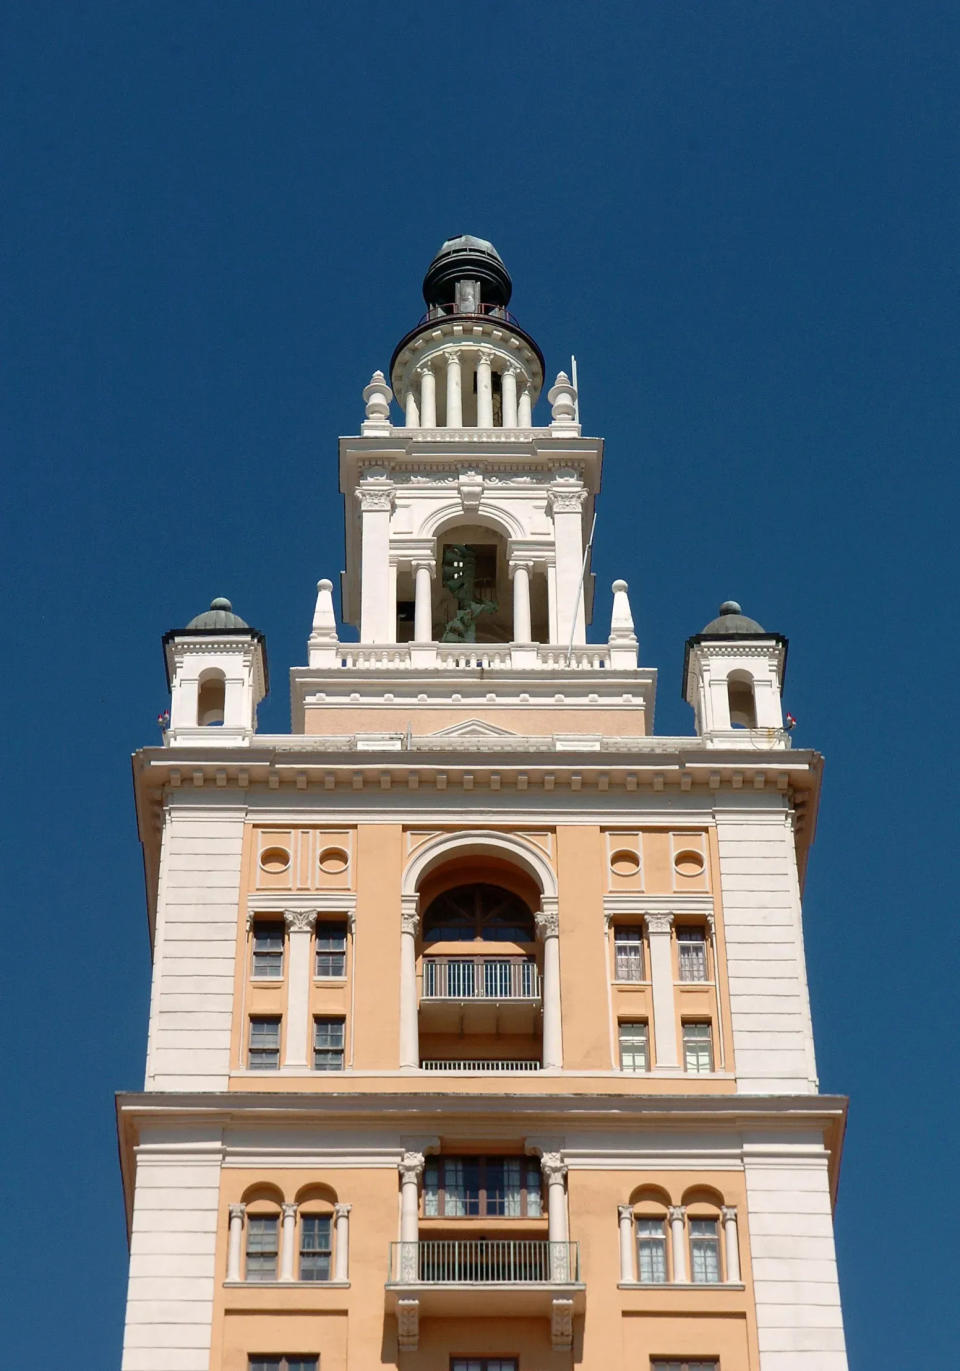 The Biltmore Hotel’s 15-story central tower was inspired by the Giralda Tower on the cathedral in Seville, Spain.